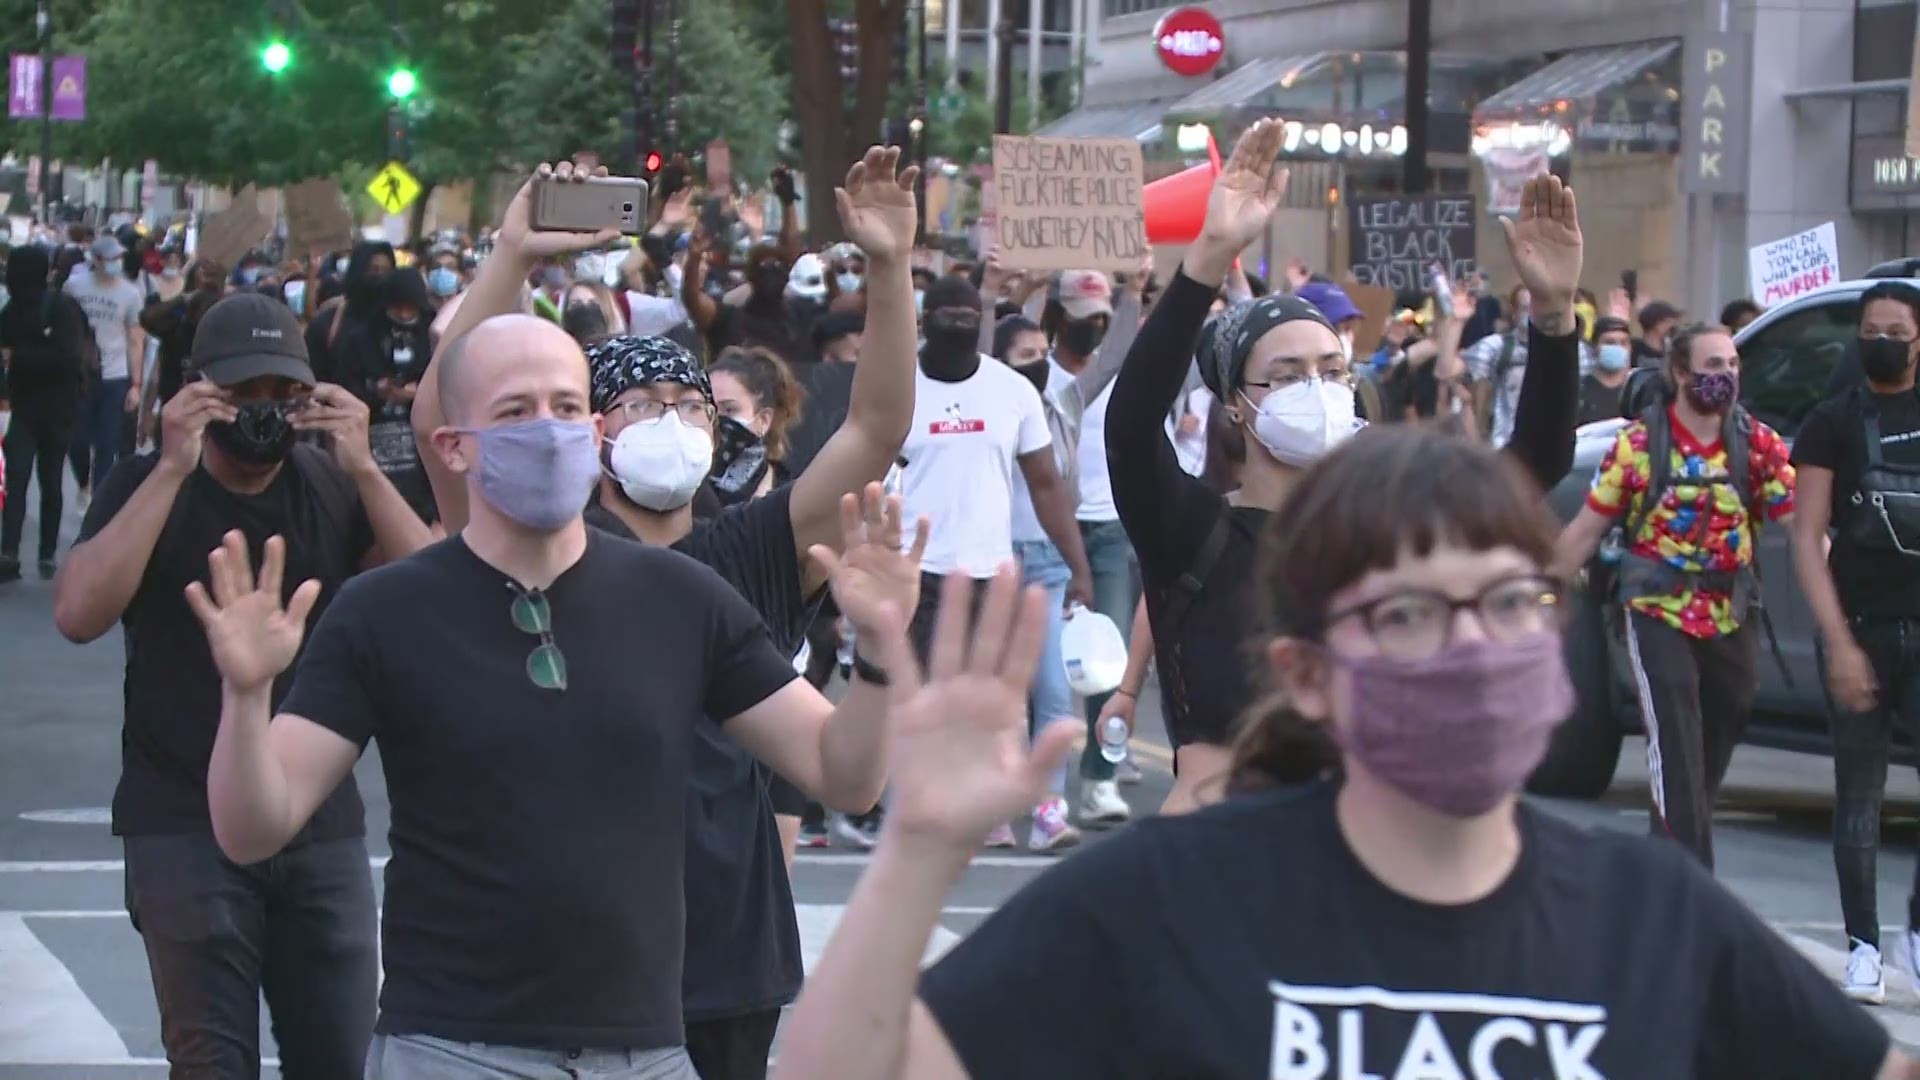 DC Police are accused of using a 'kettling' maneuver to trap protesters onto a small street for mass arrests on June 1. WUSA9 examines the impact on protesters.